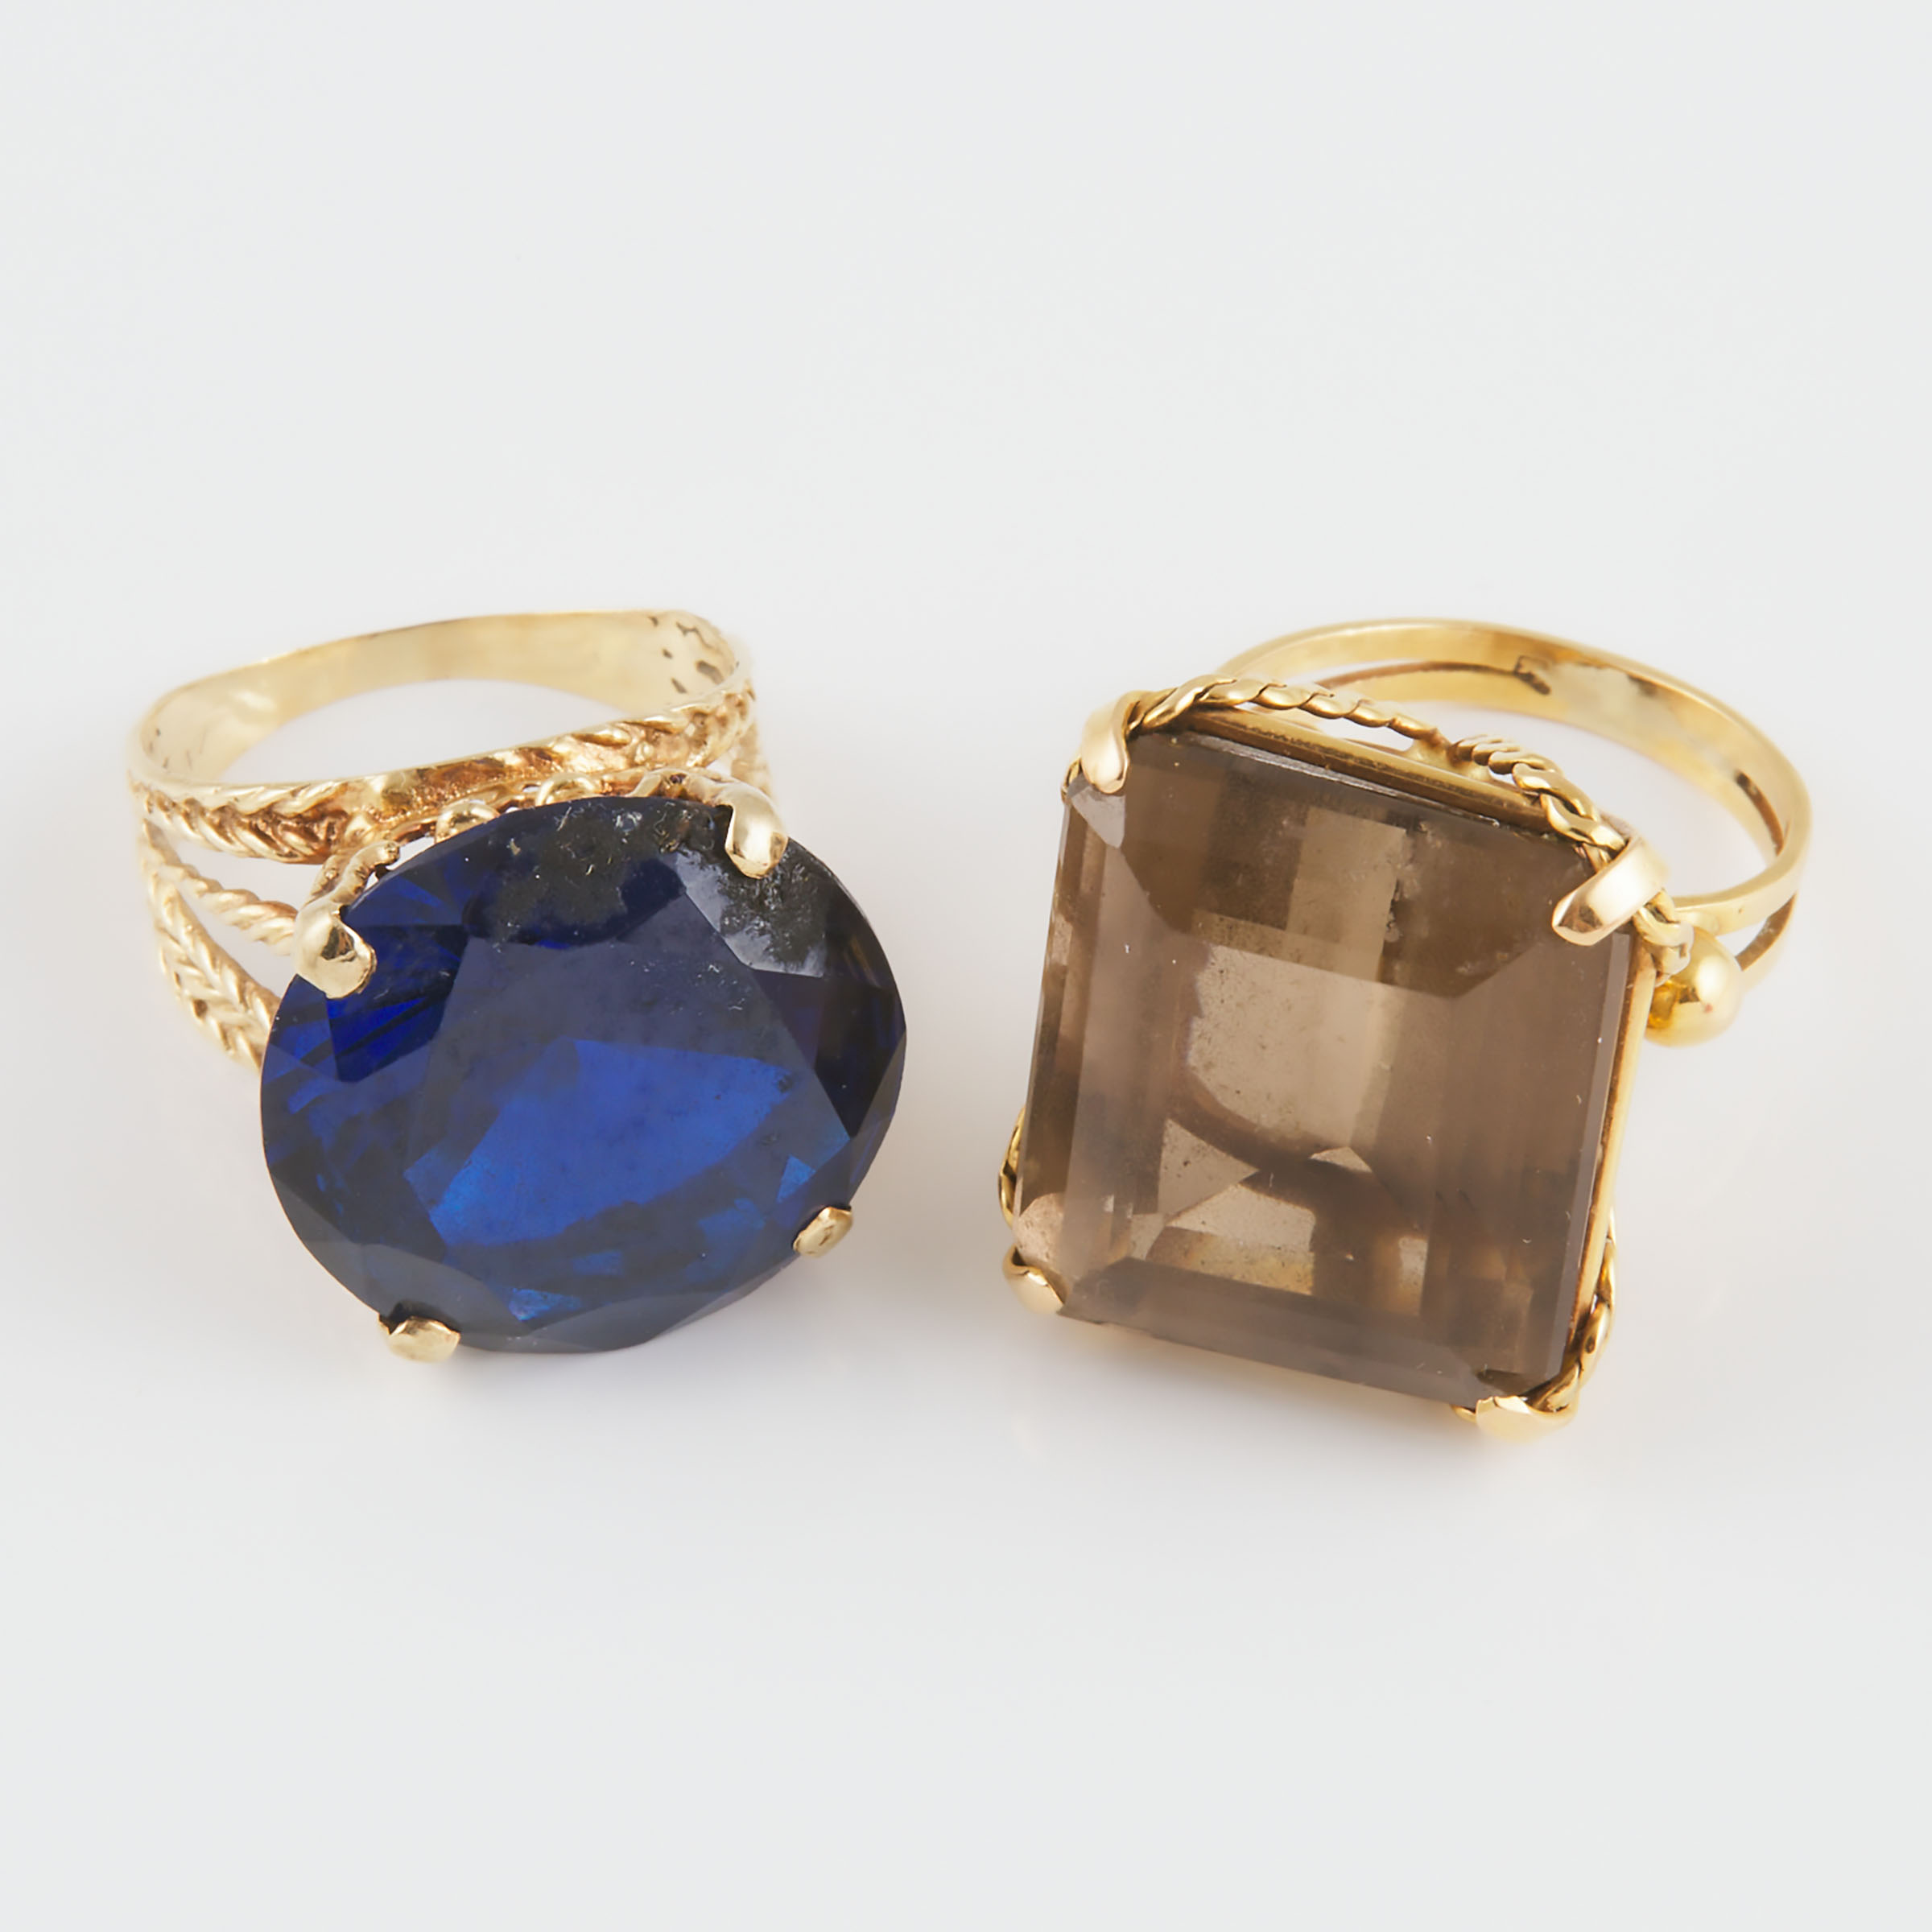 2 Yellow Gold Cocktail Rings